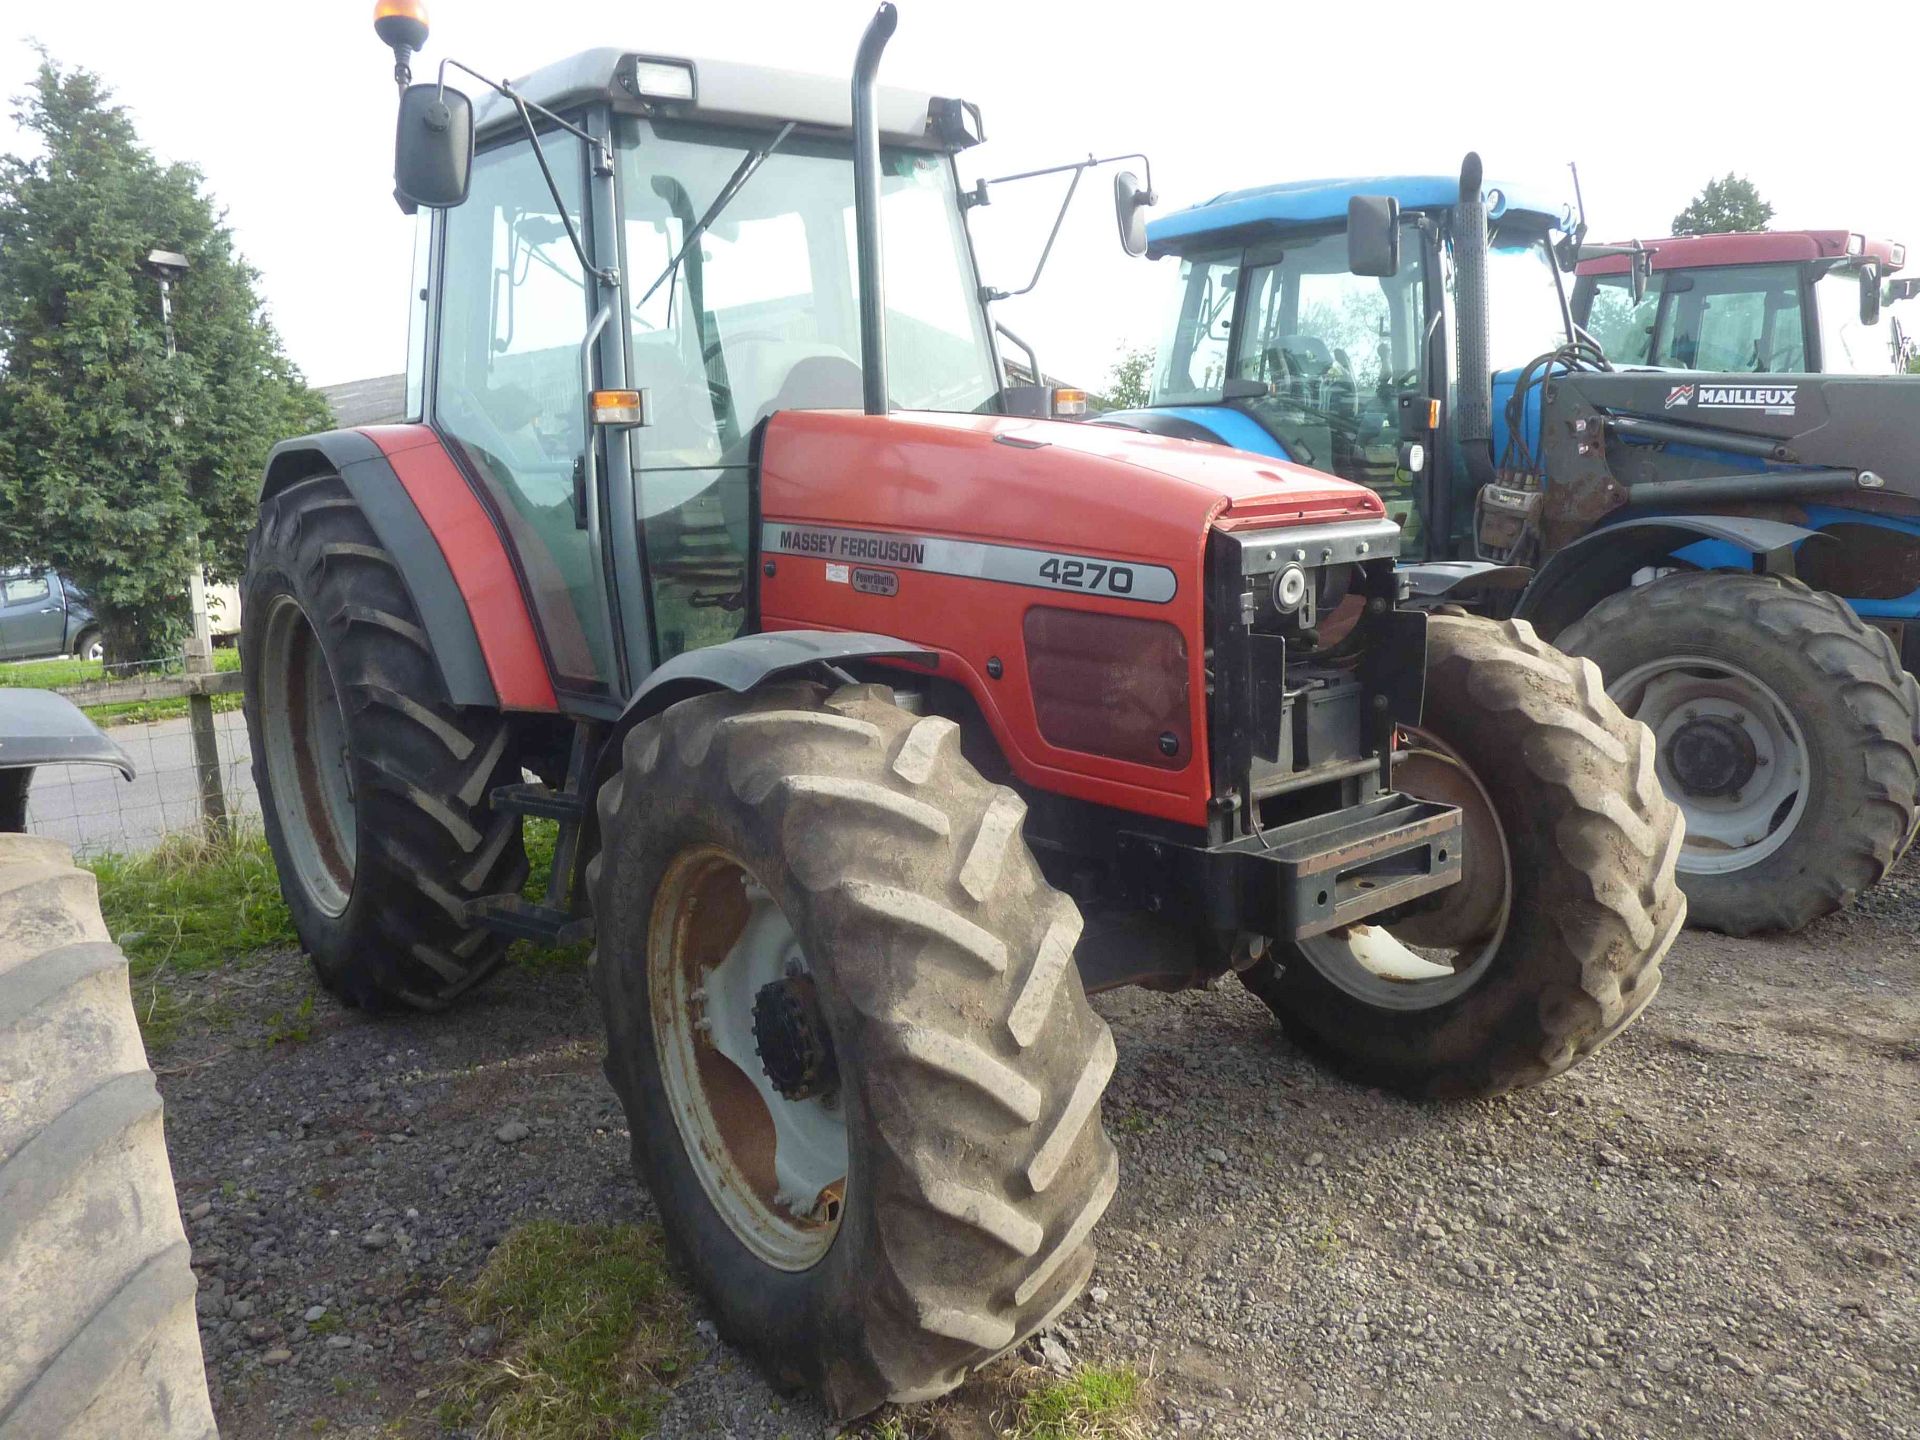 5215 MF 4270 tractor 4x4 power shift, Y662 BSH, new rear tyres, 5300 hours